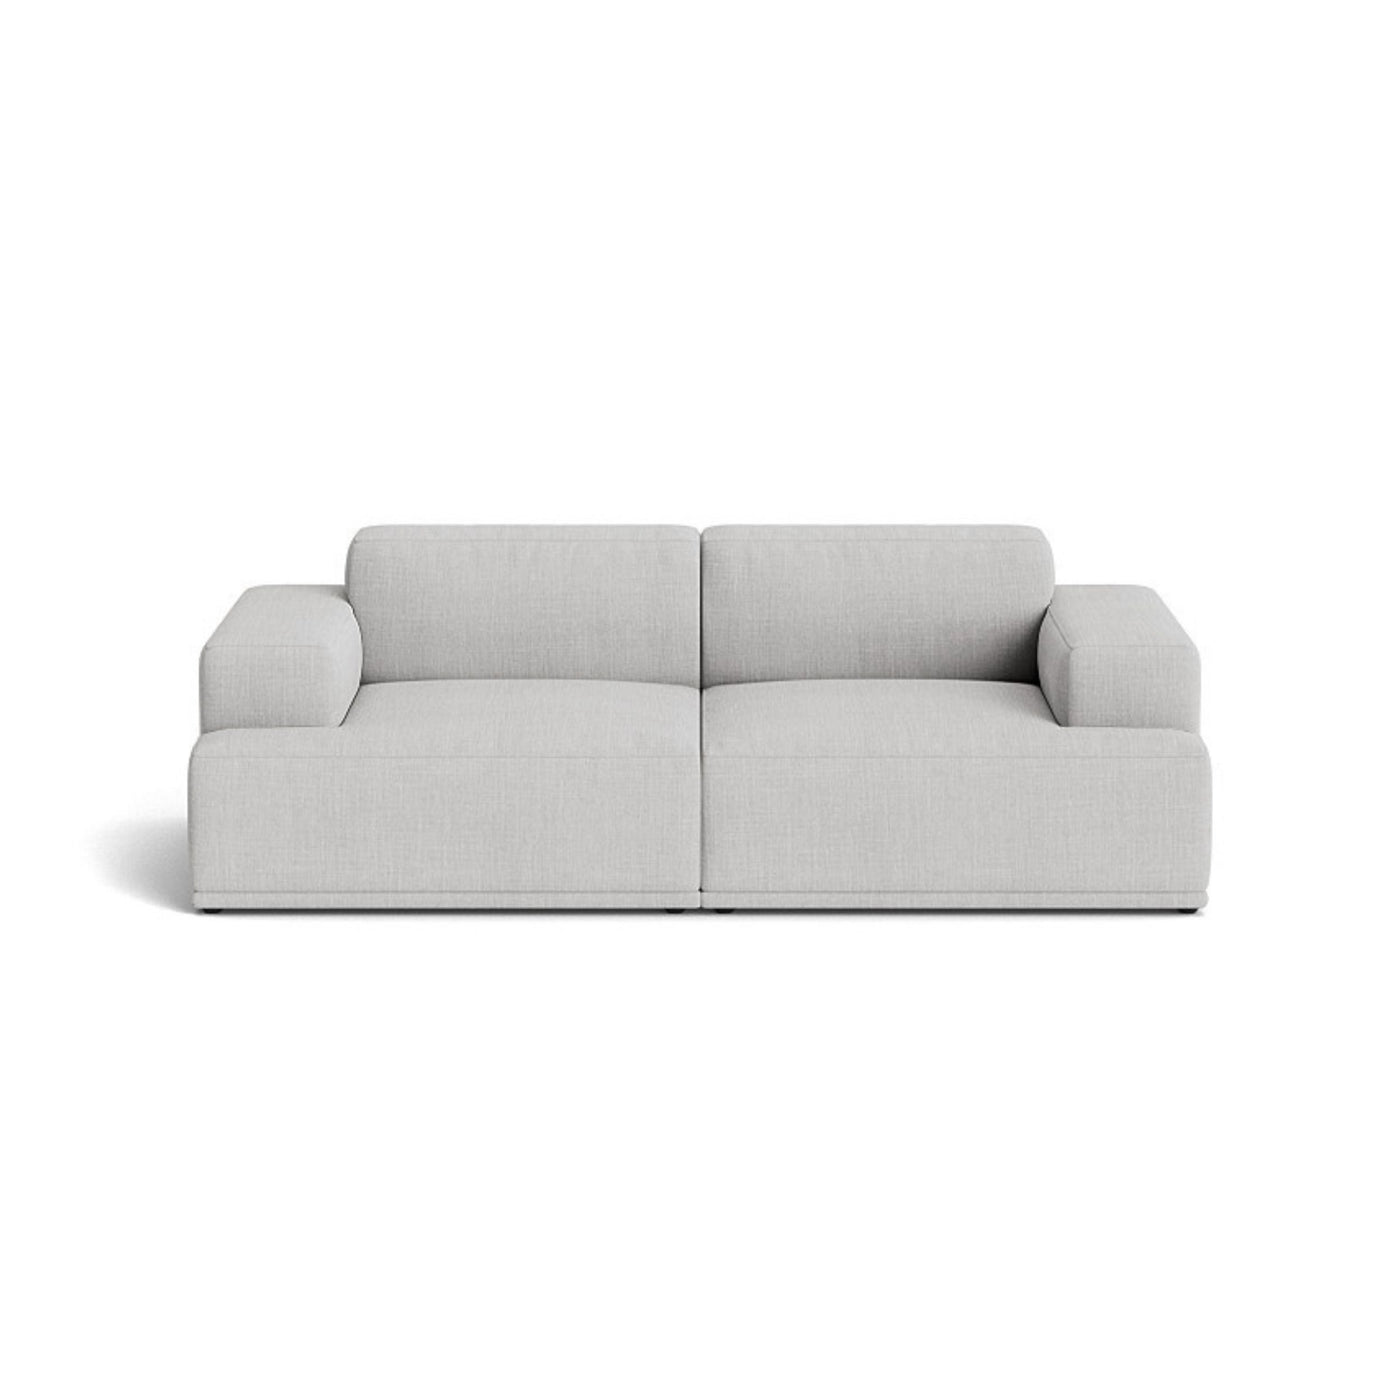 Muuto Connect Soft Modular 2 Seater Sofa, configuration 1. made-to-order from someday designs. #colour_remix-123